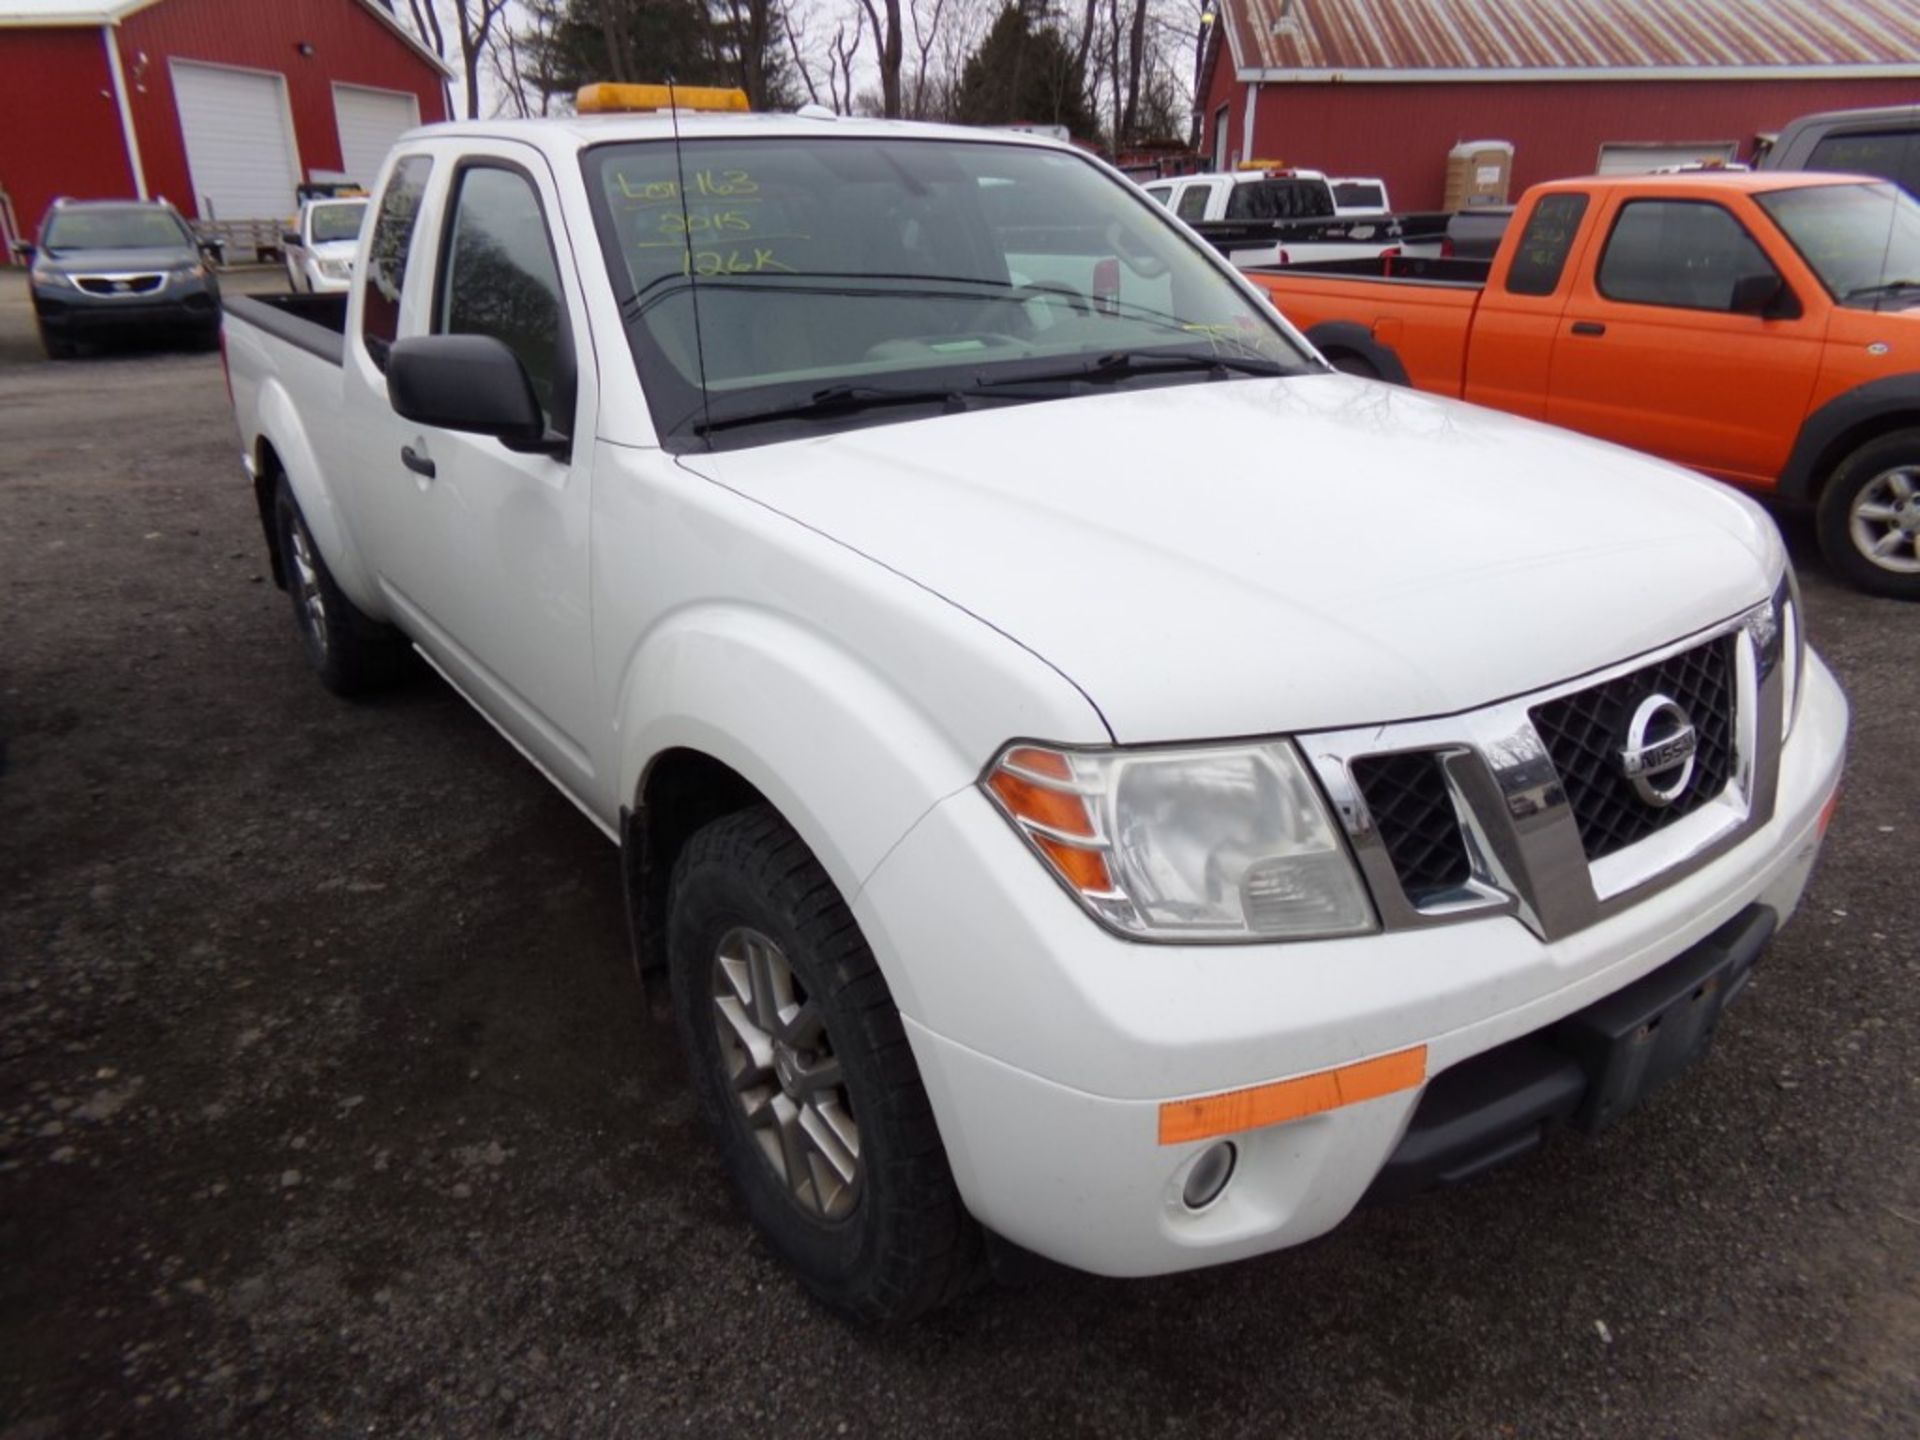 2015 Nissan Frontier SV 4 x 4 Ext. Cab, White, 126,409 Miles, Orange Light on Roof, SOME SURFACE - Image 4 of 11